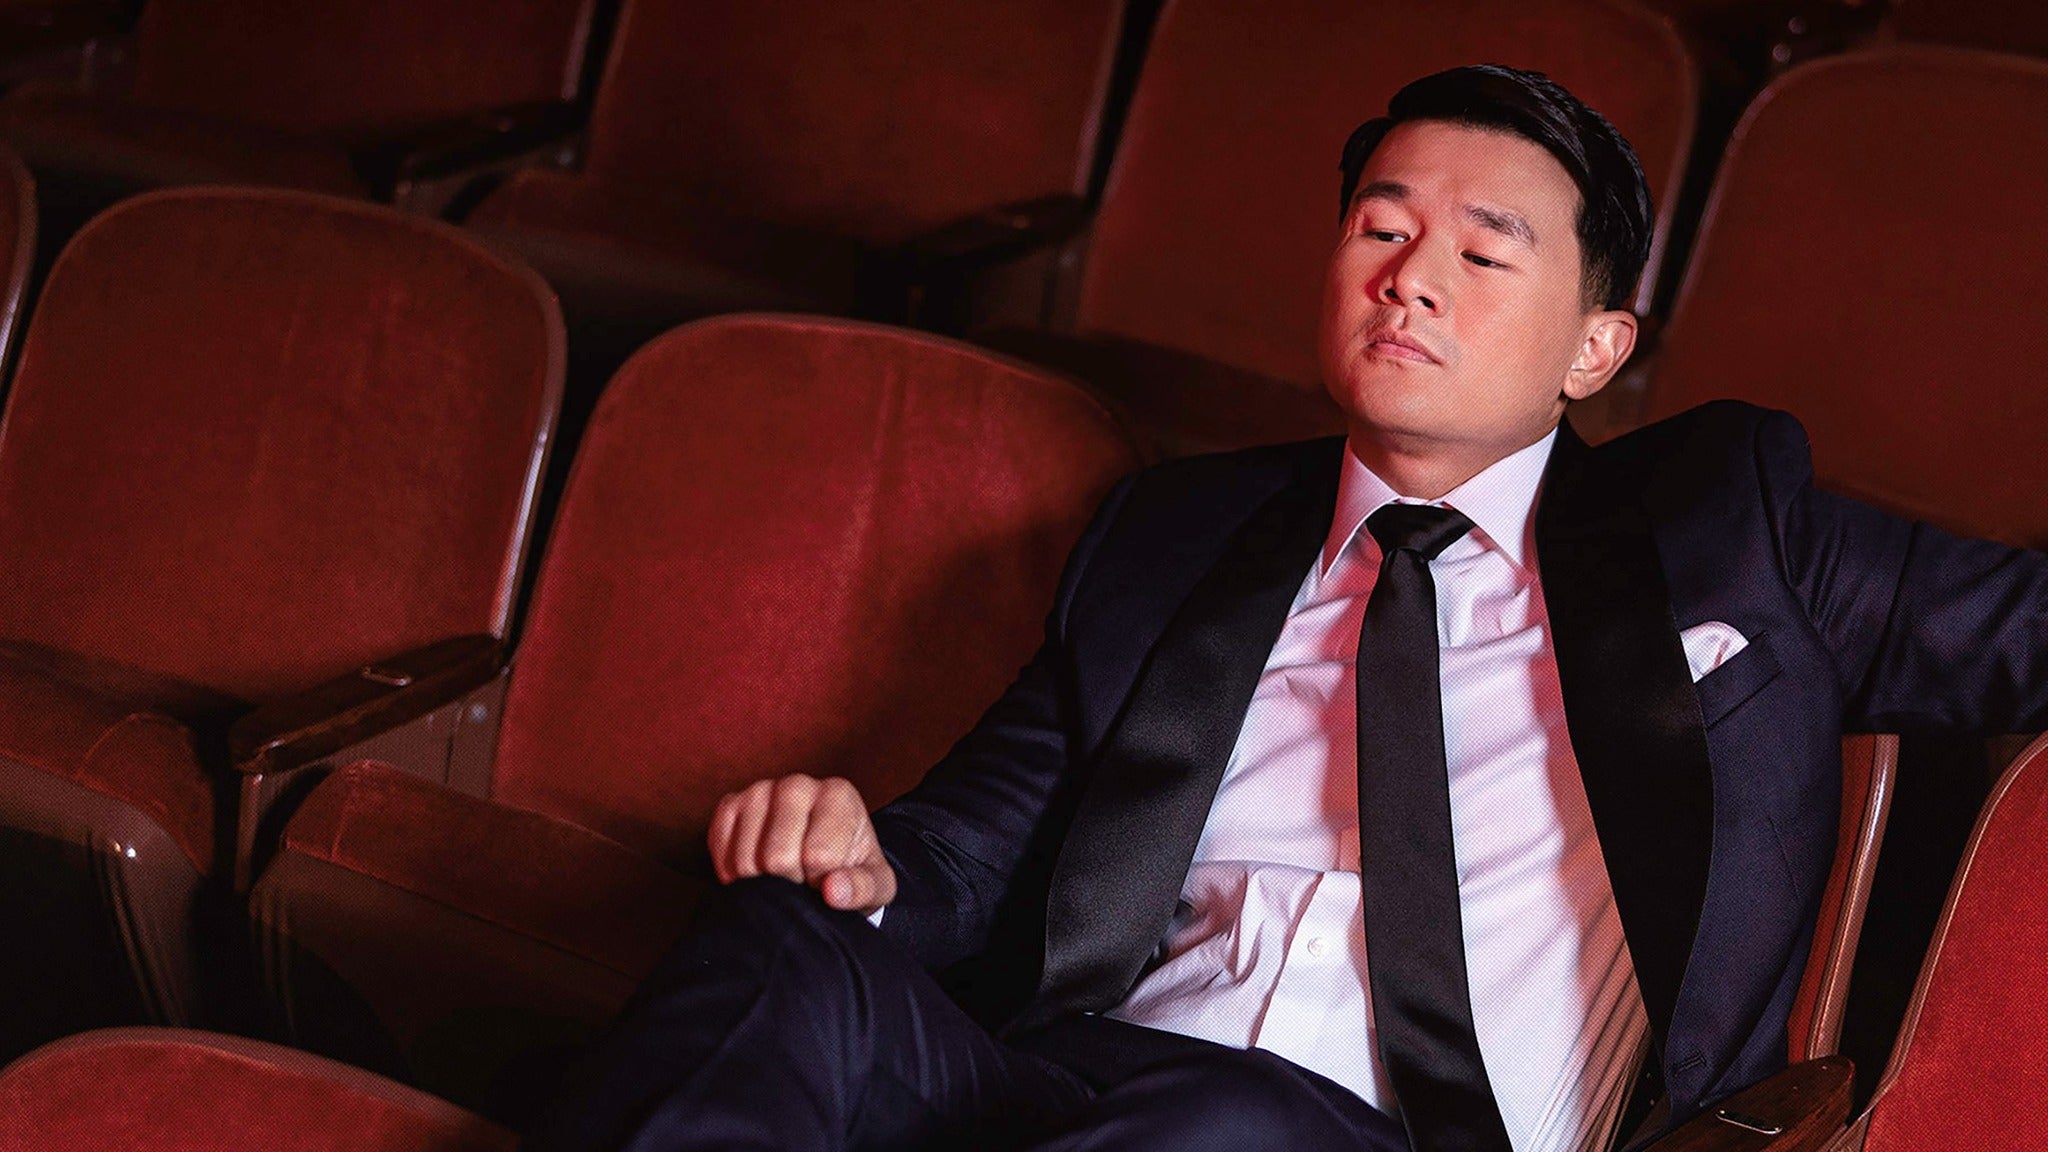 NY Comedy Festival Presents Ronny Chieng: The Hope You Get Rich Tour presale code for show tickets in New York, NY (Town Hall)